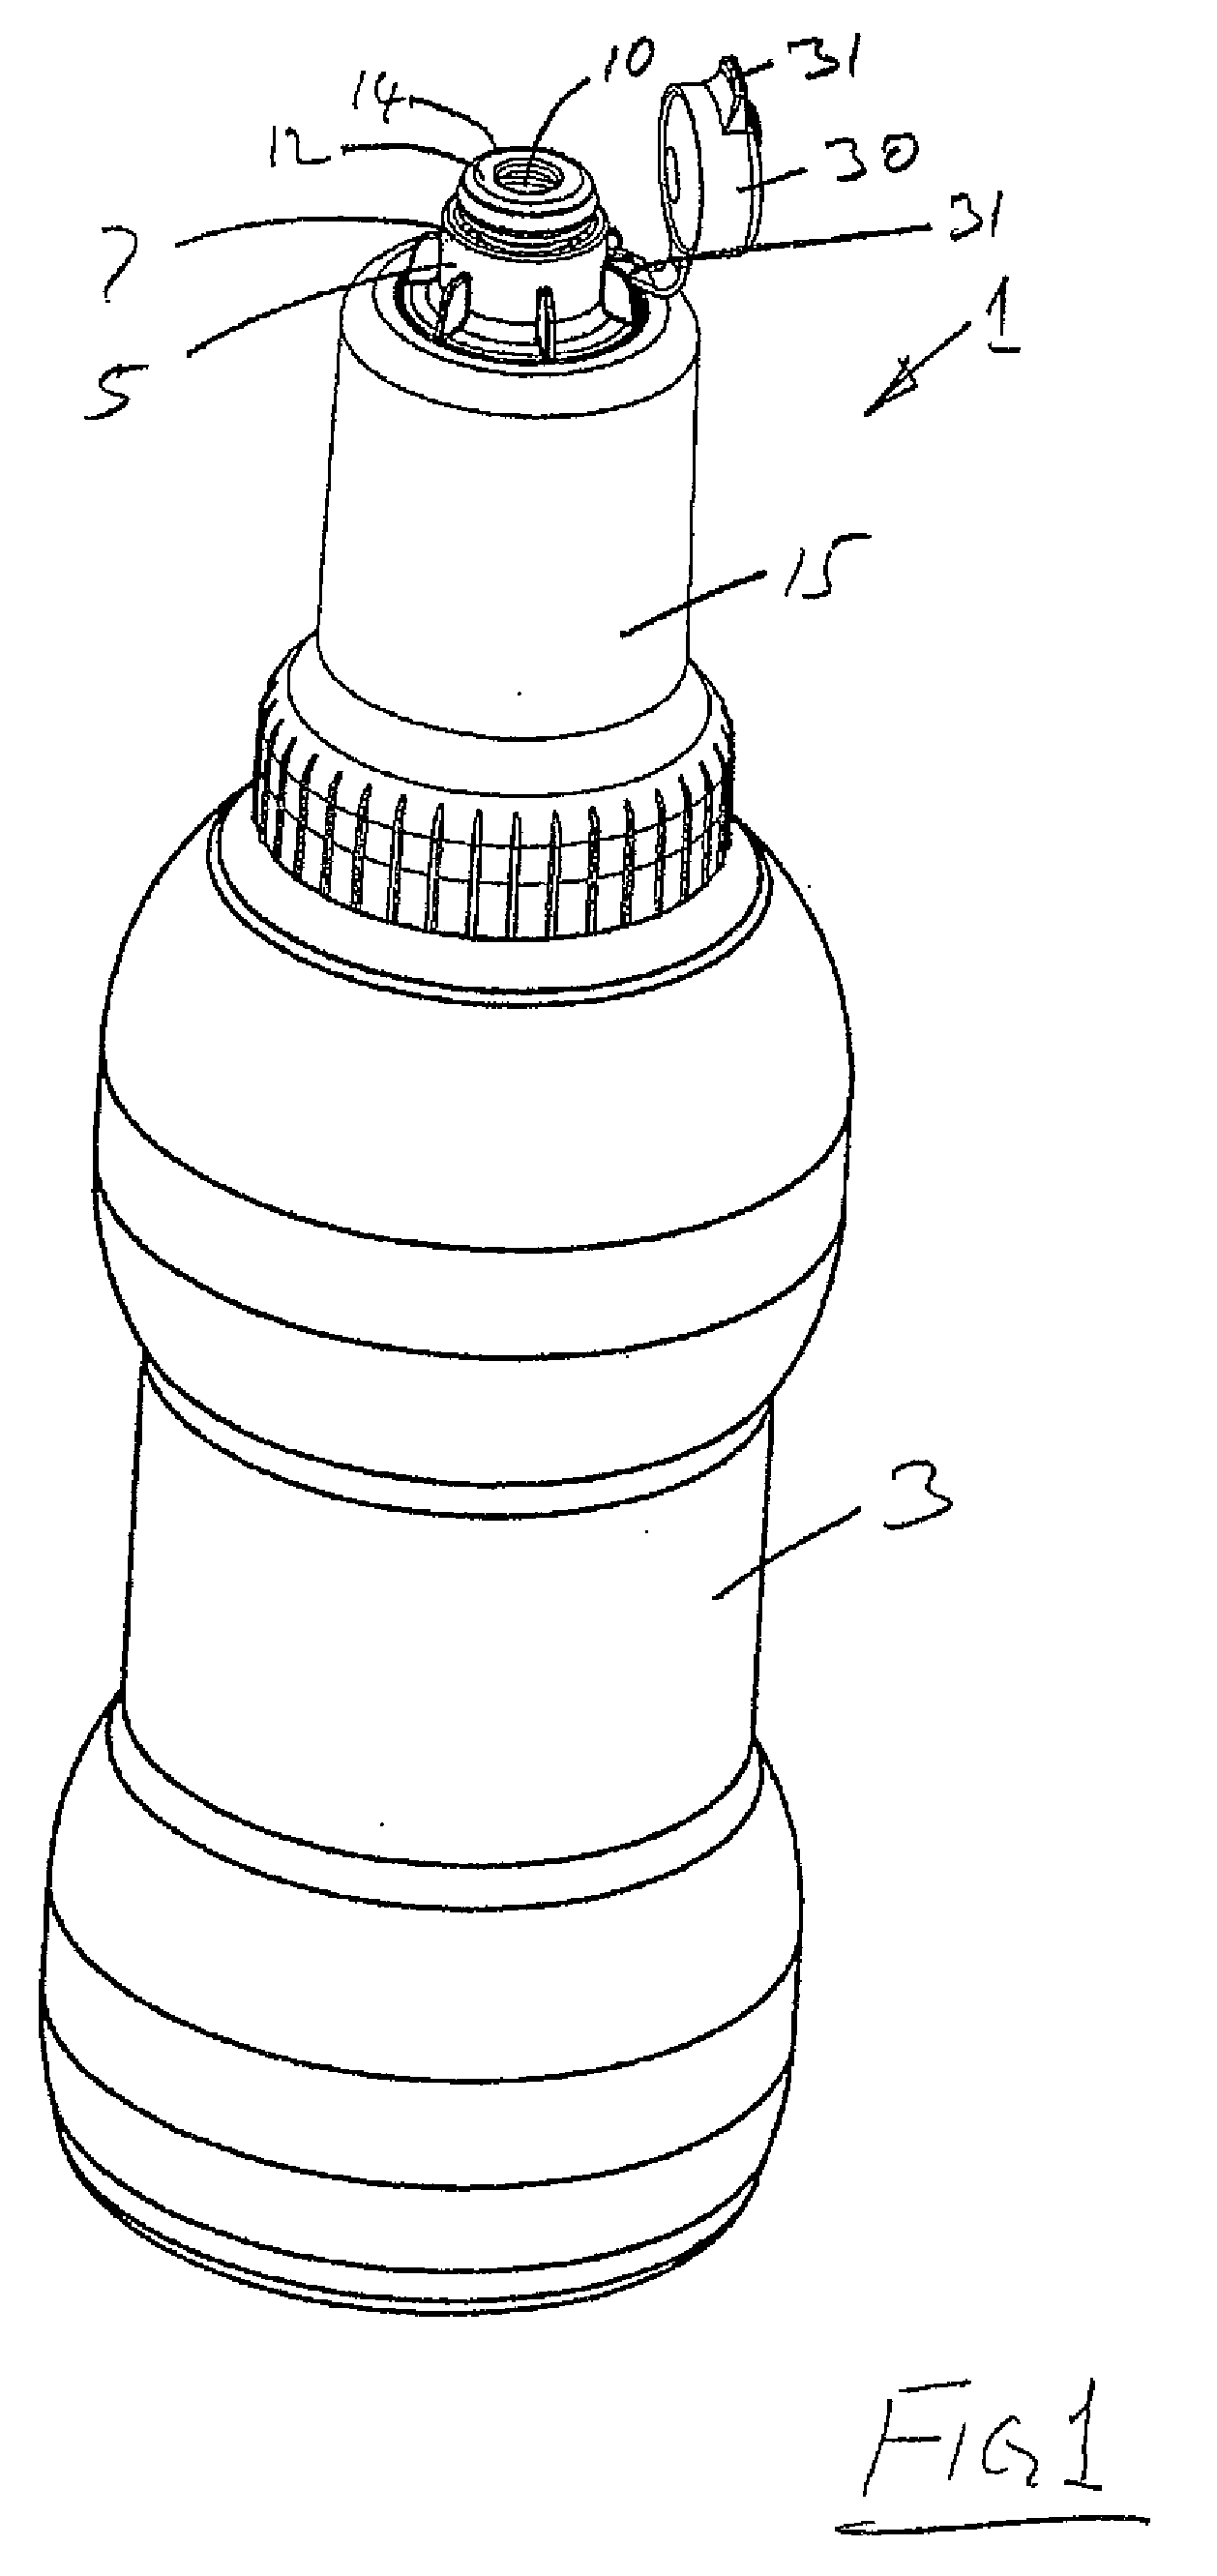 Filter device for filtering liquid from a source